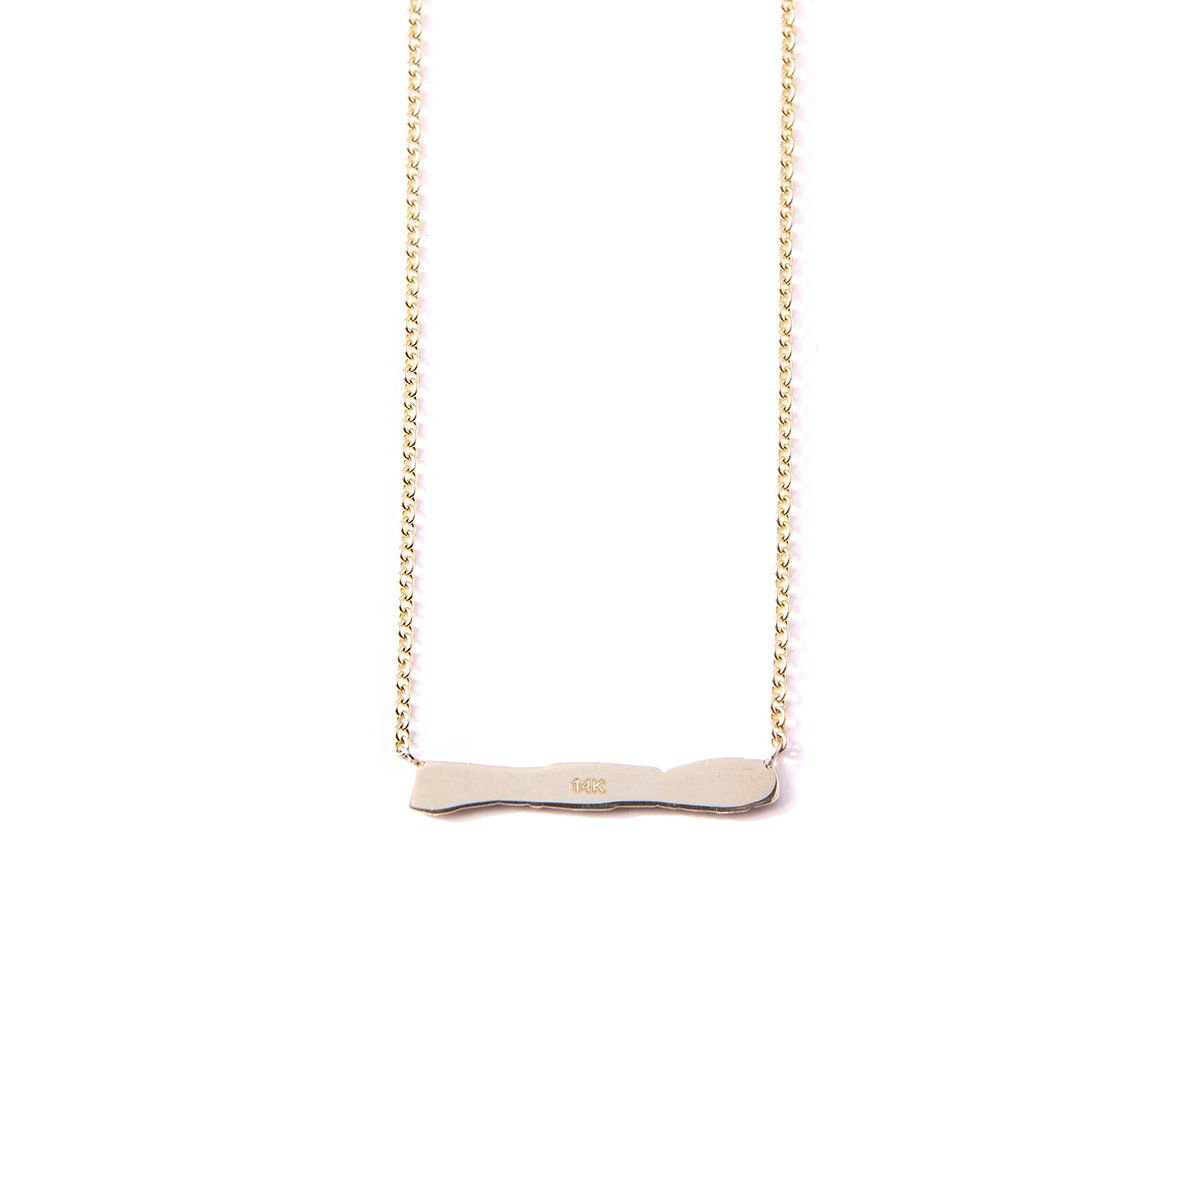 Image of 14k NeverMind Chain & Pendant 